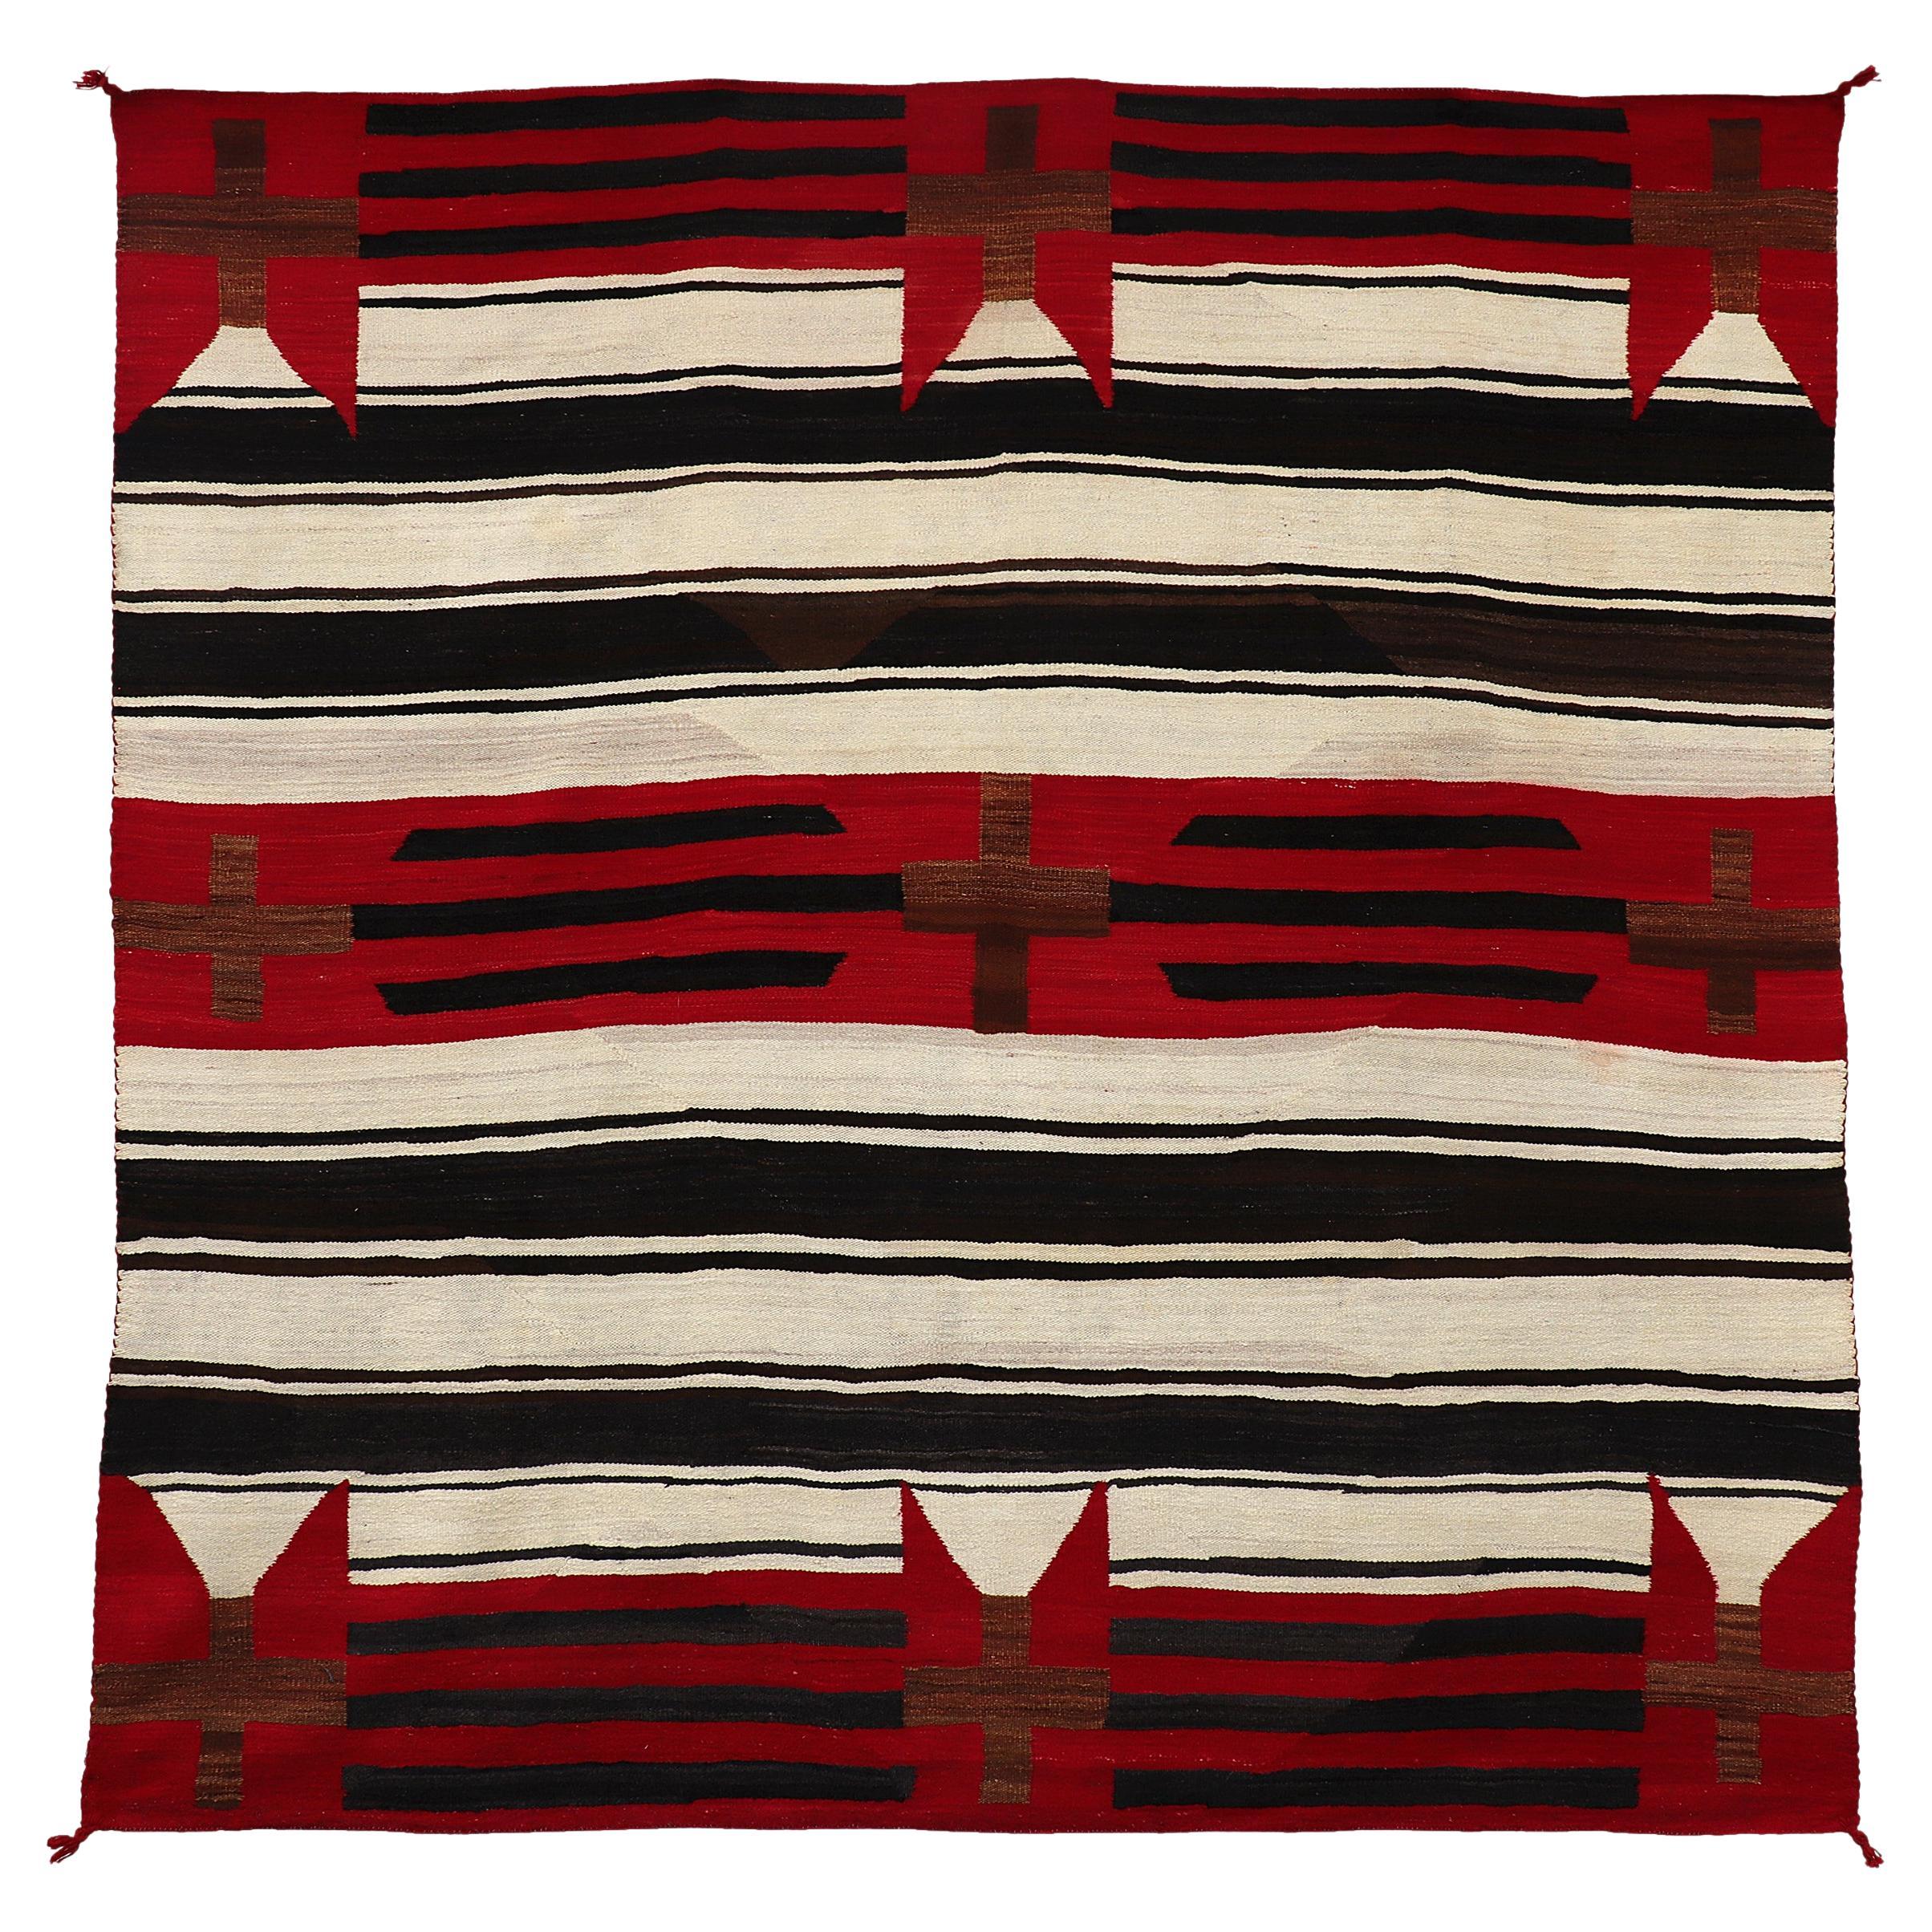 Vintage Navajo Chief's Blanket with Cross Design, 1930s, Red White Black Brown